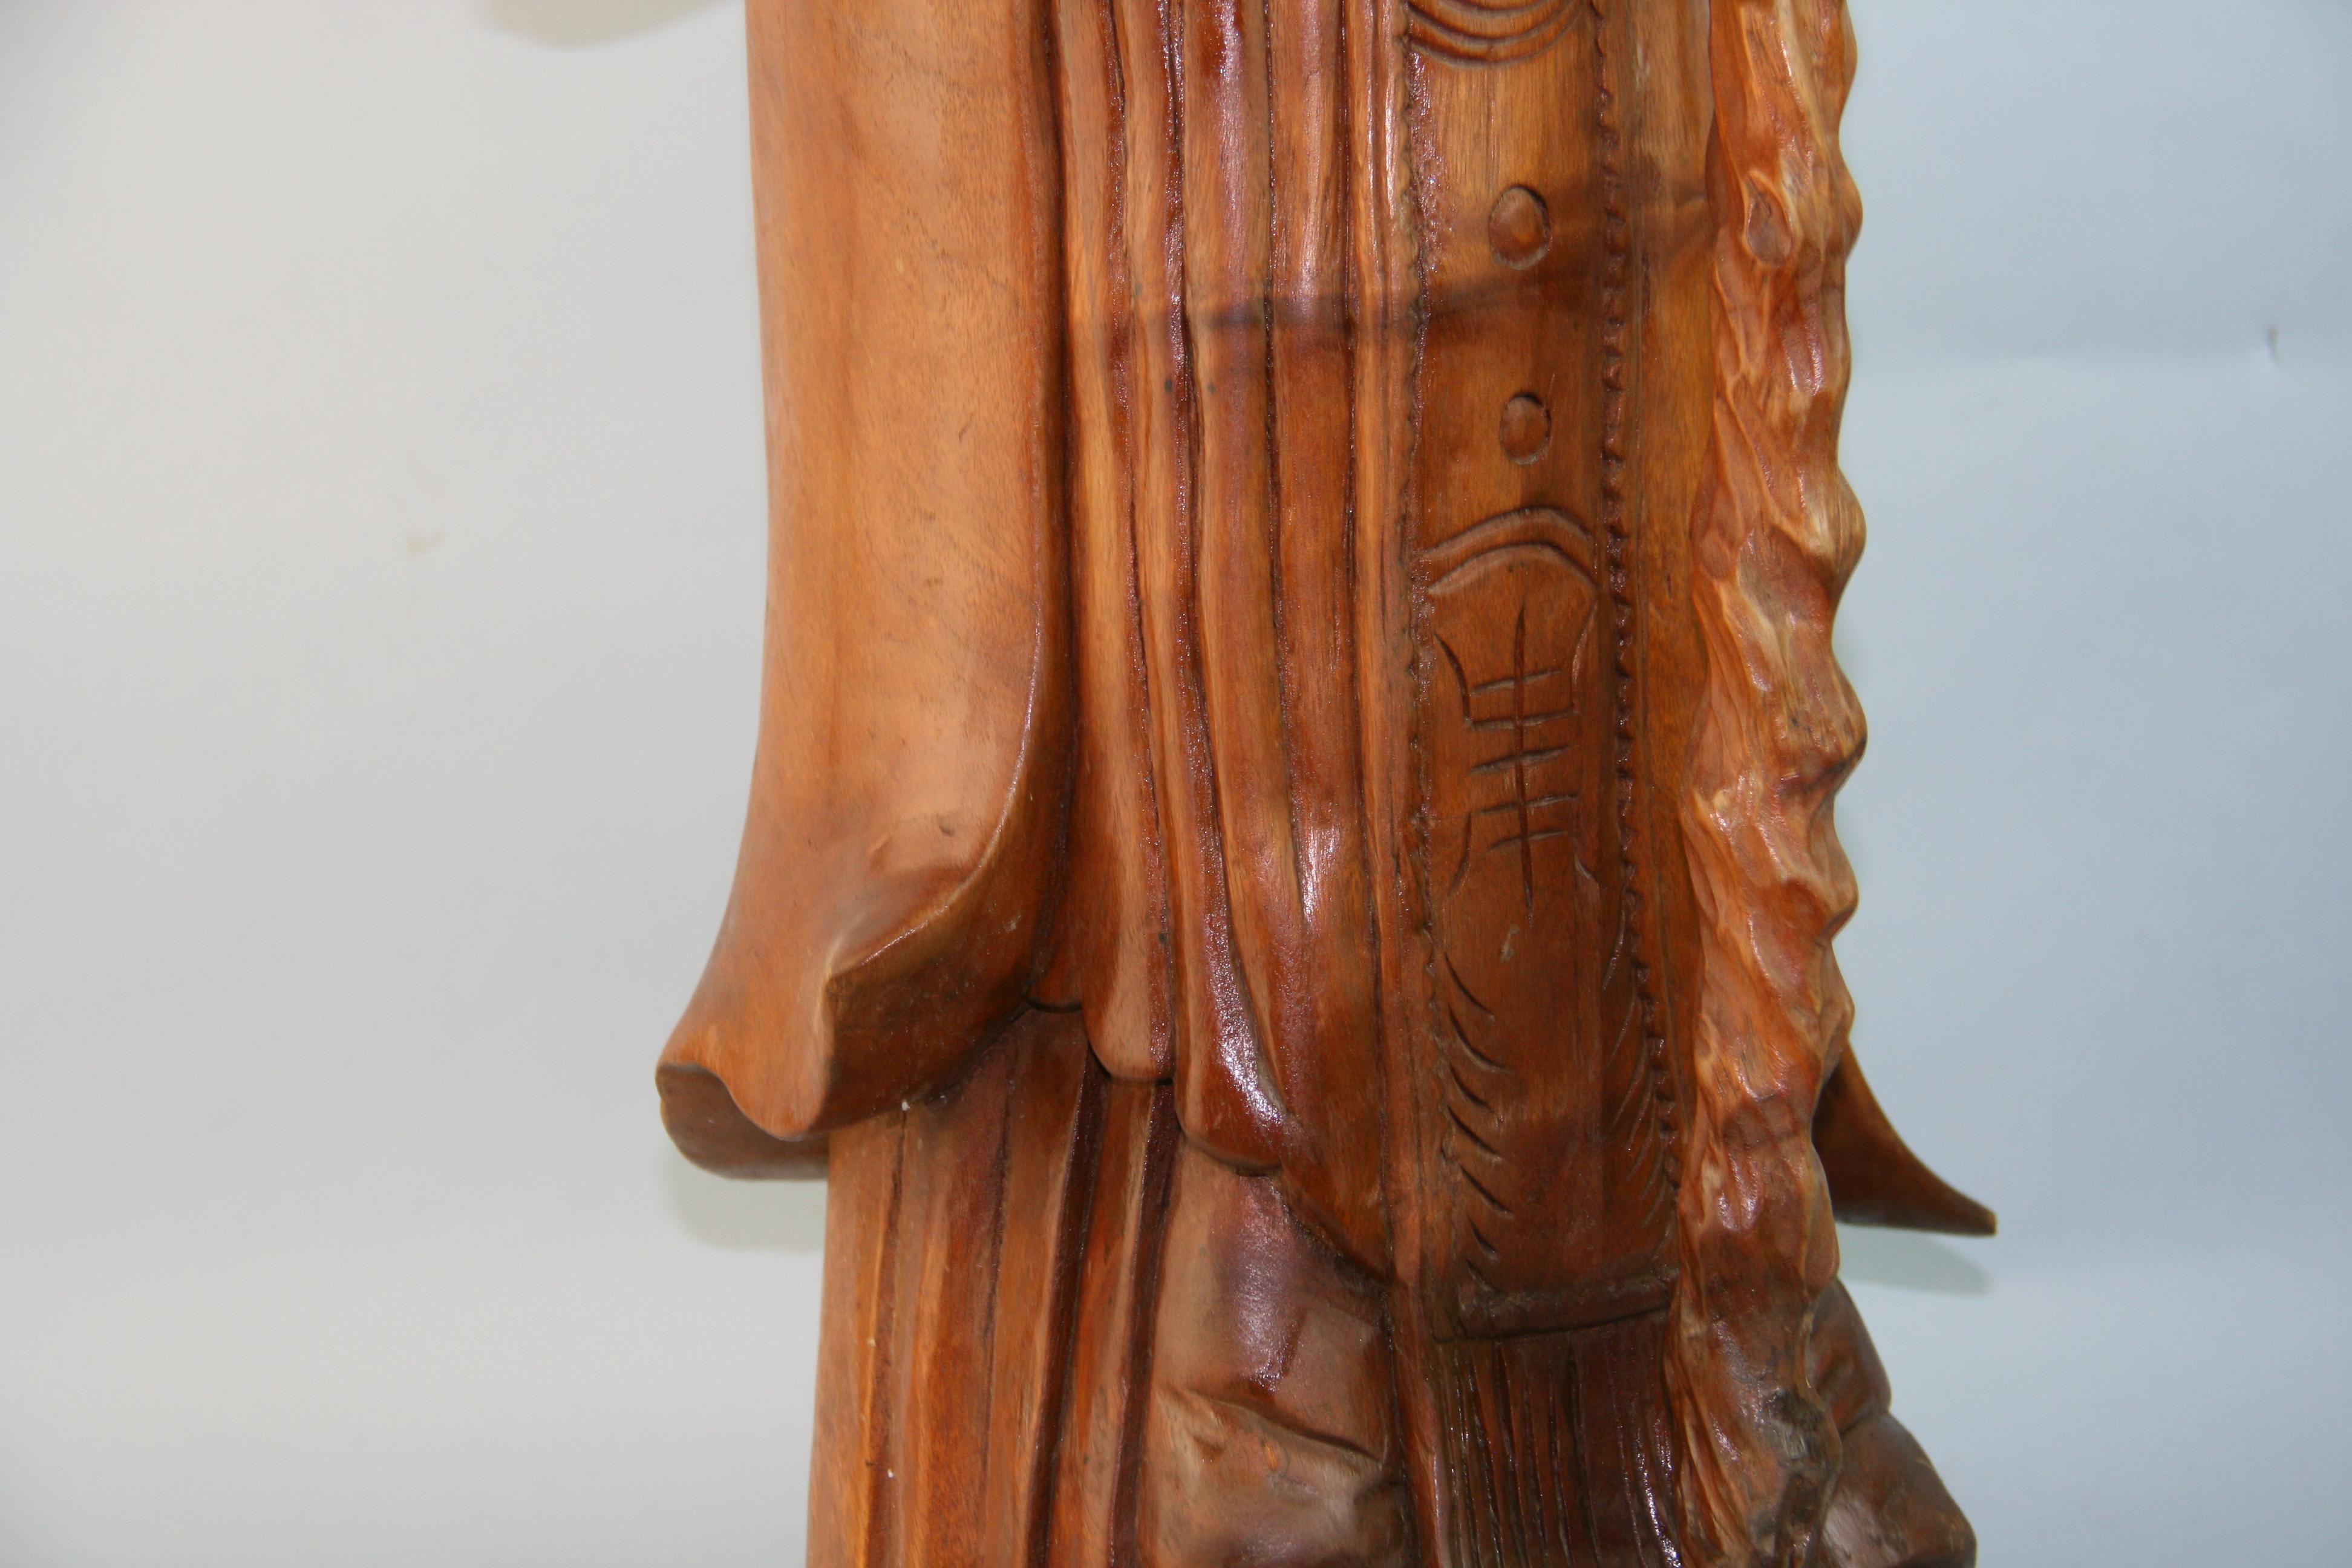 Japanese Oversized Wise Buddha Hand Carved Boxwood Sculpture Early 20th Century For Sale 2